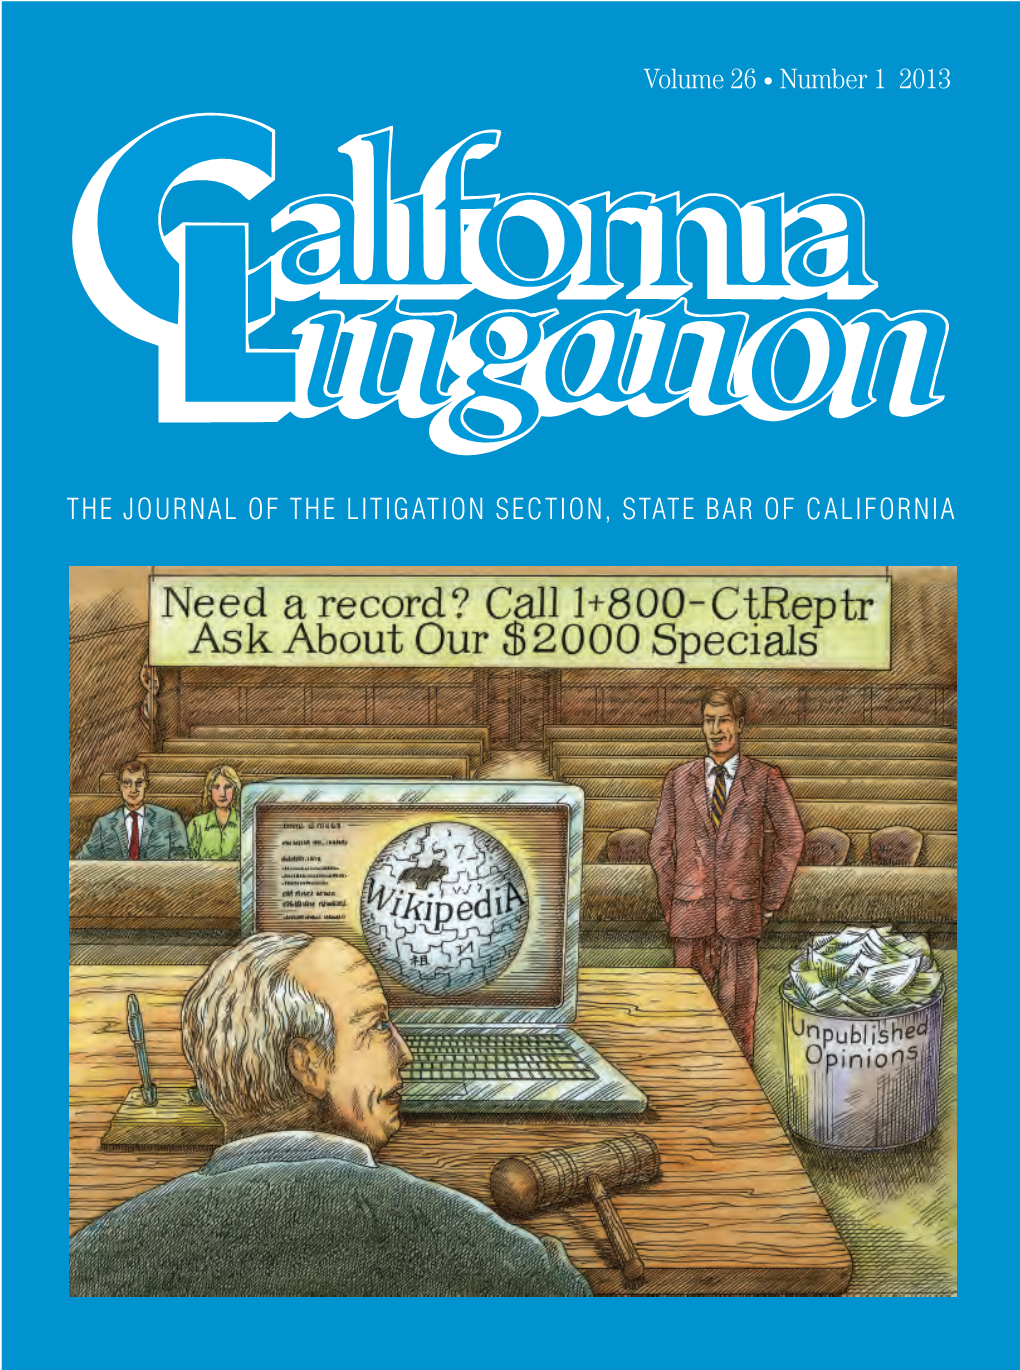 THE JOURNAL of the LITIGATION SECTION, STATE BAR of CALIFORNIA Editorial Opinion Section Update by Lisa Cappelluti